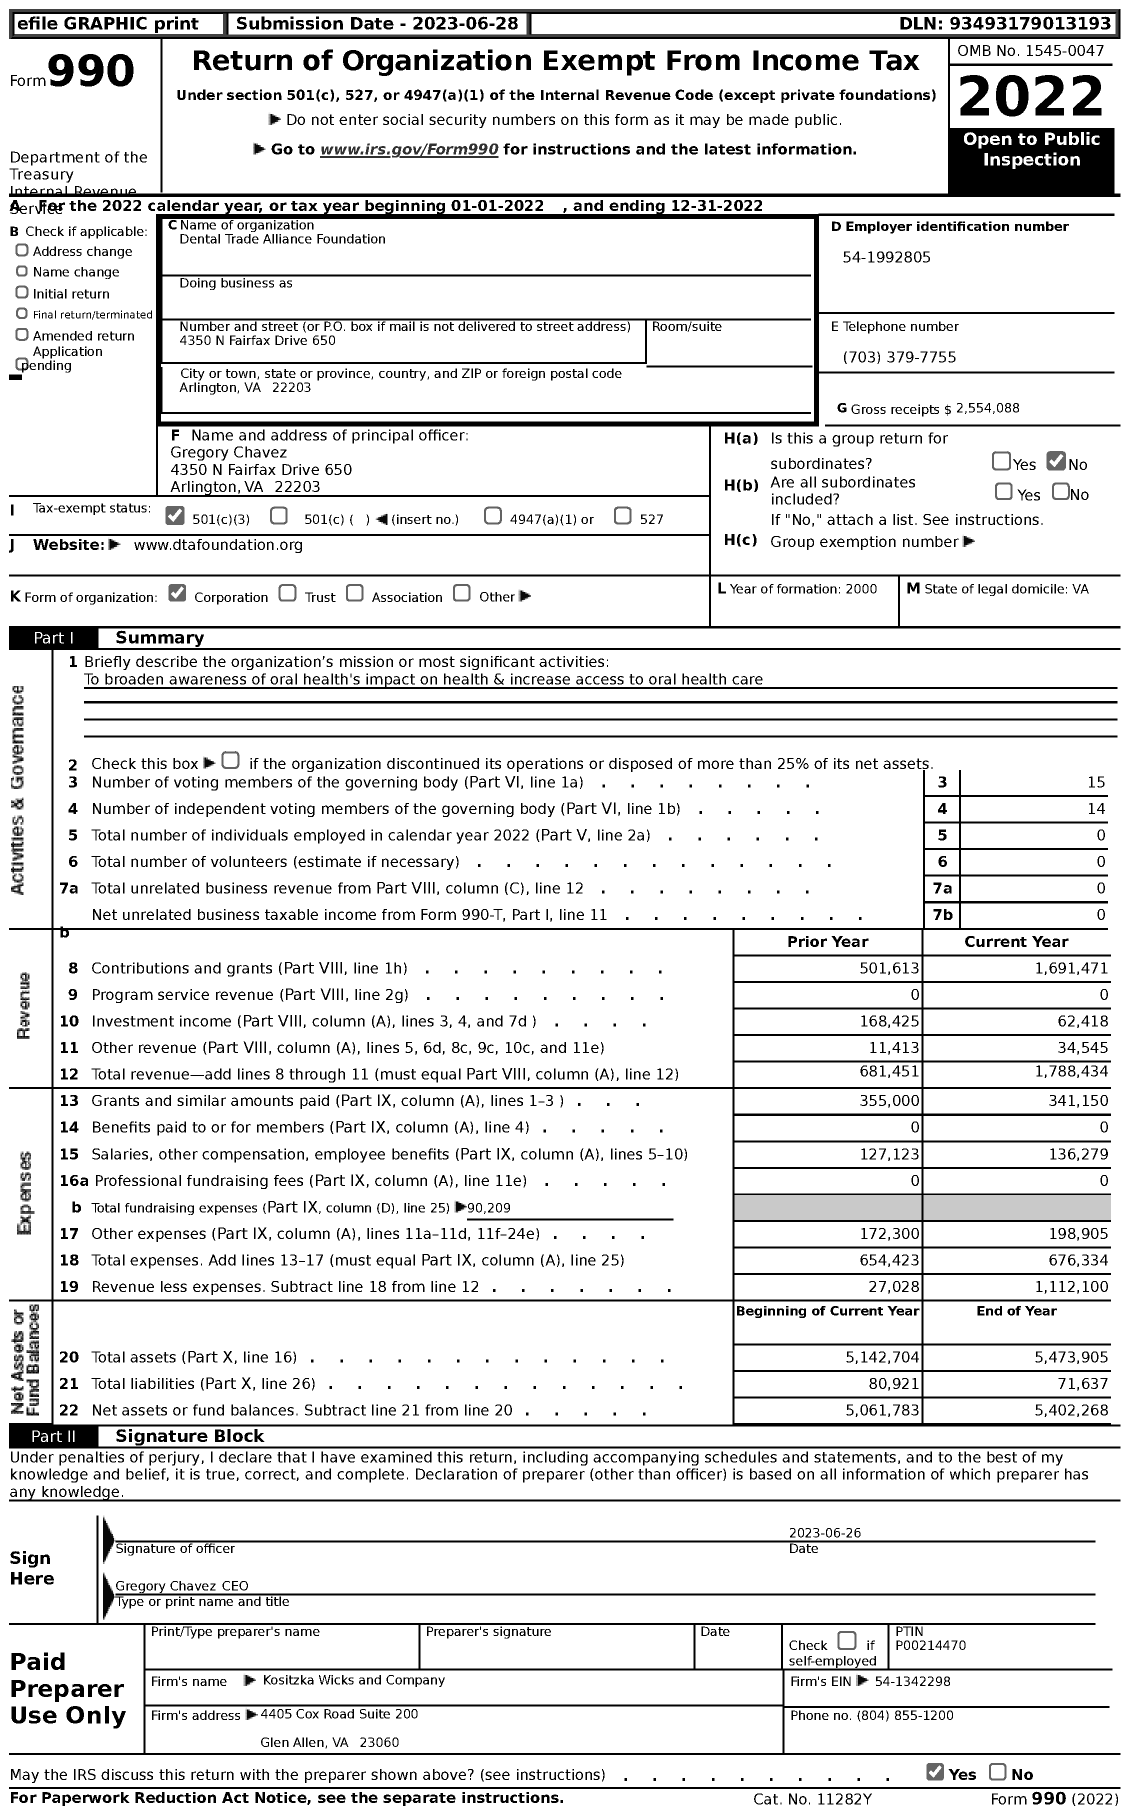 Image of first page of 2022 Form 990 for Dental Trade Alliance Foundation